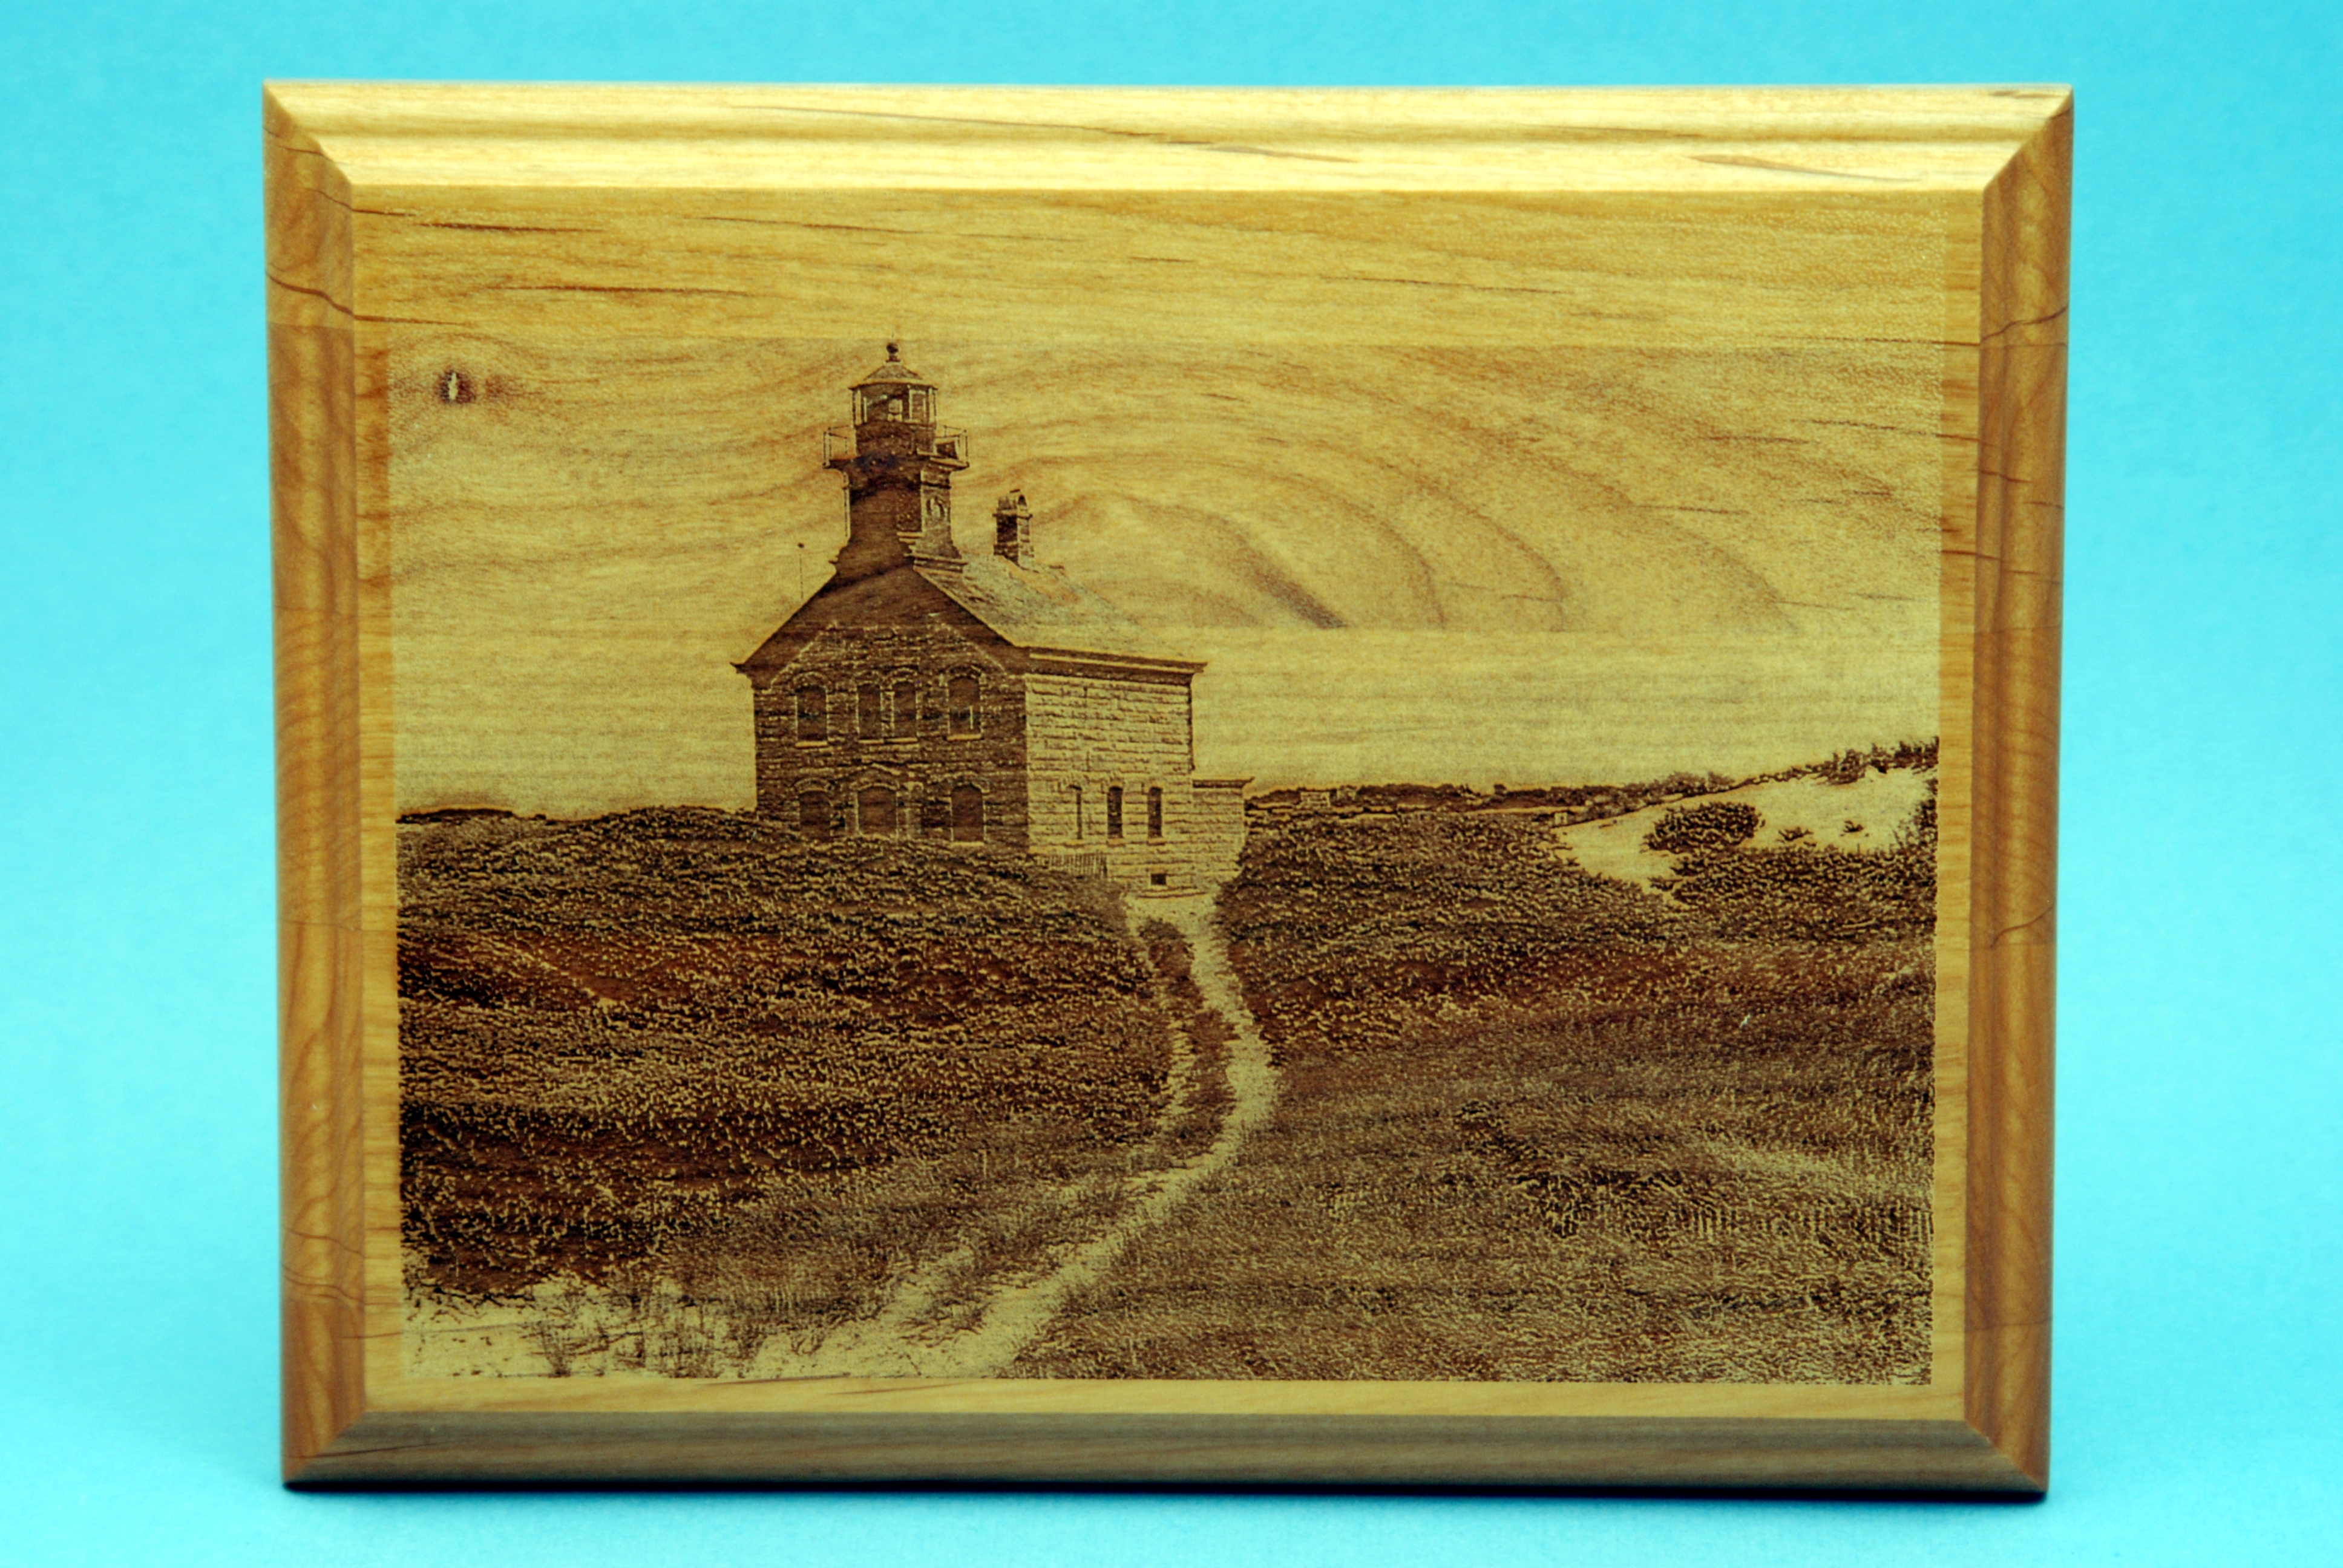 8" X 10" Laser Engraved Wood Photo Plaque